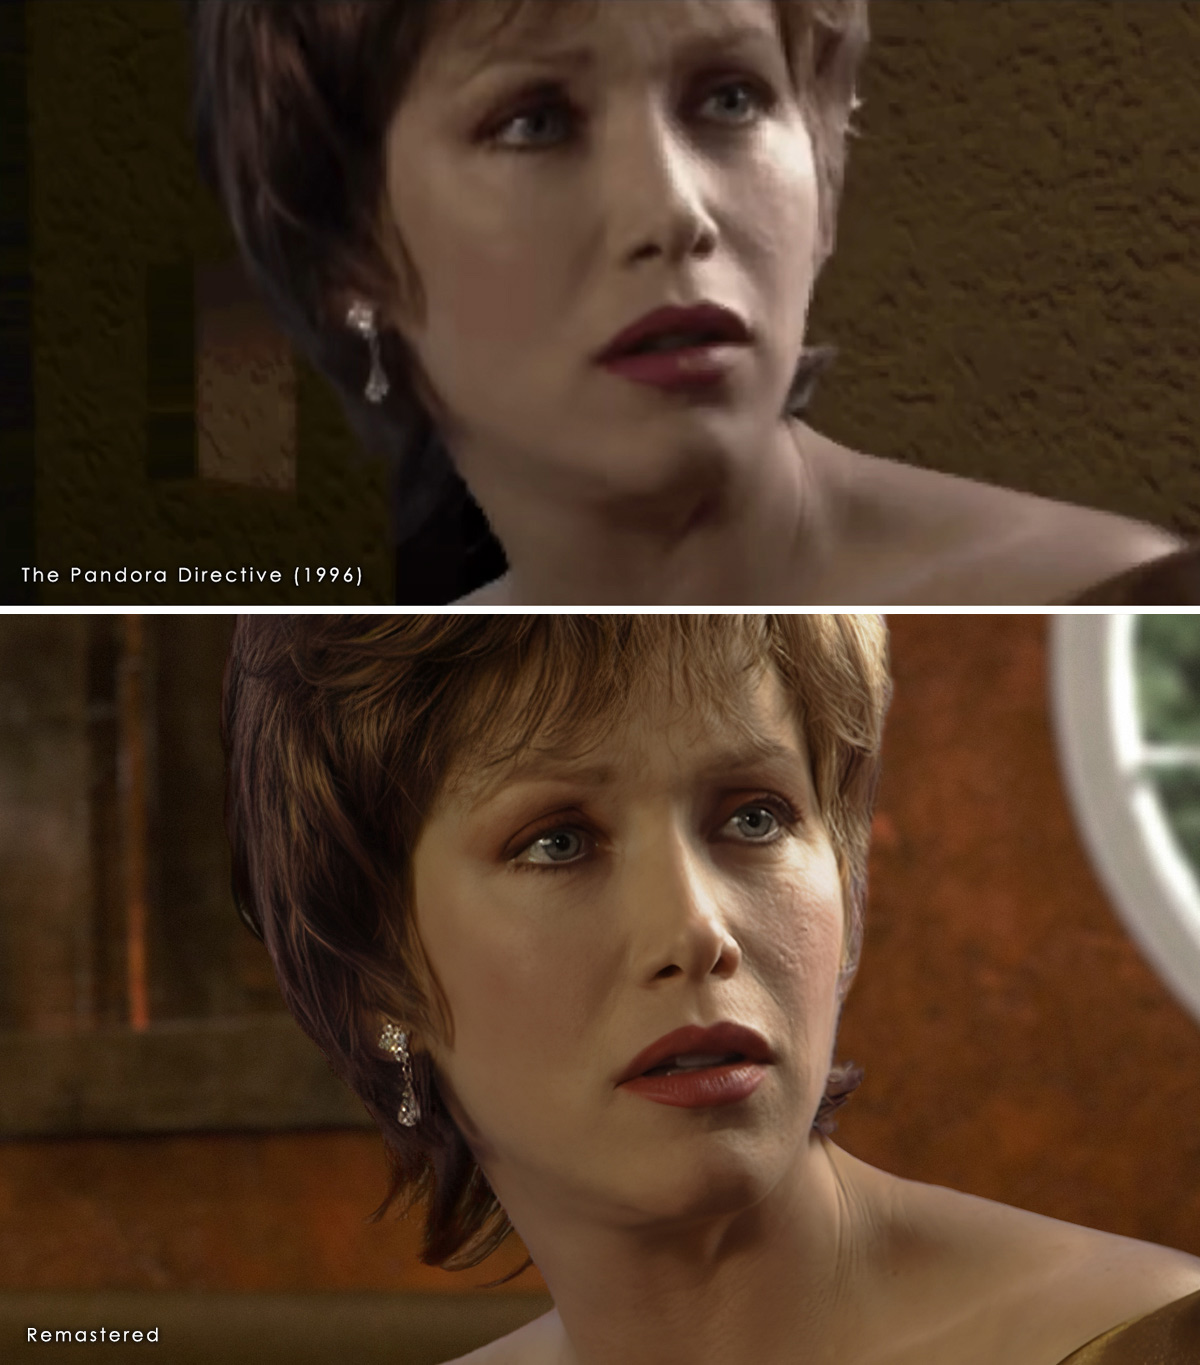 A top and bottom comparison of Regan Madsen inside the Savoy, between the original 1996 video and the modern remaster.